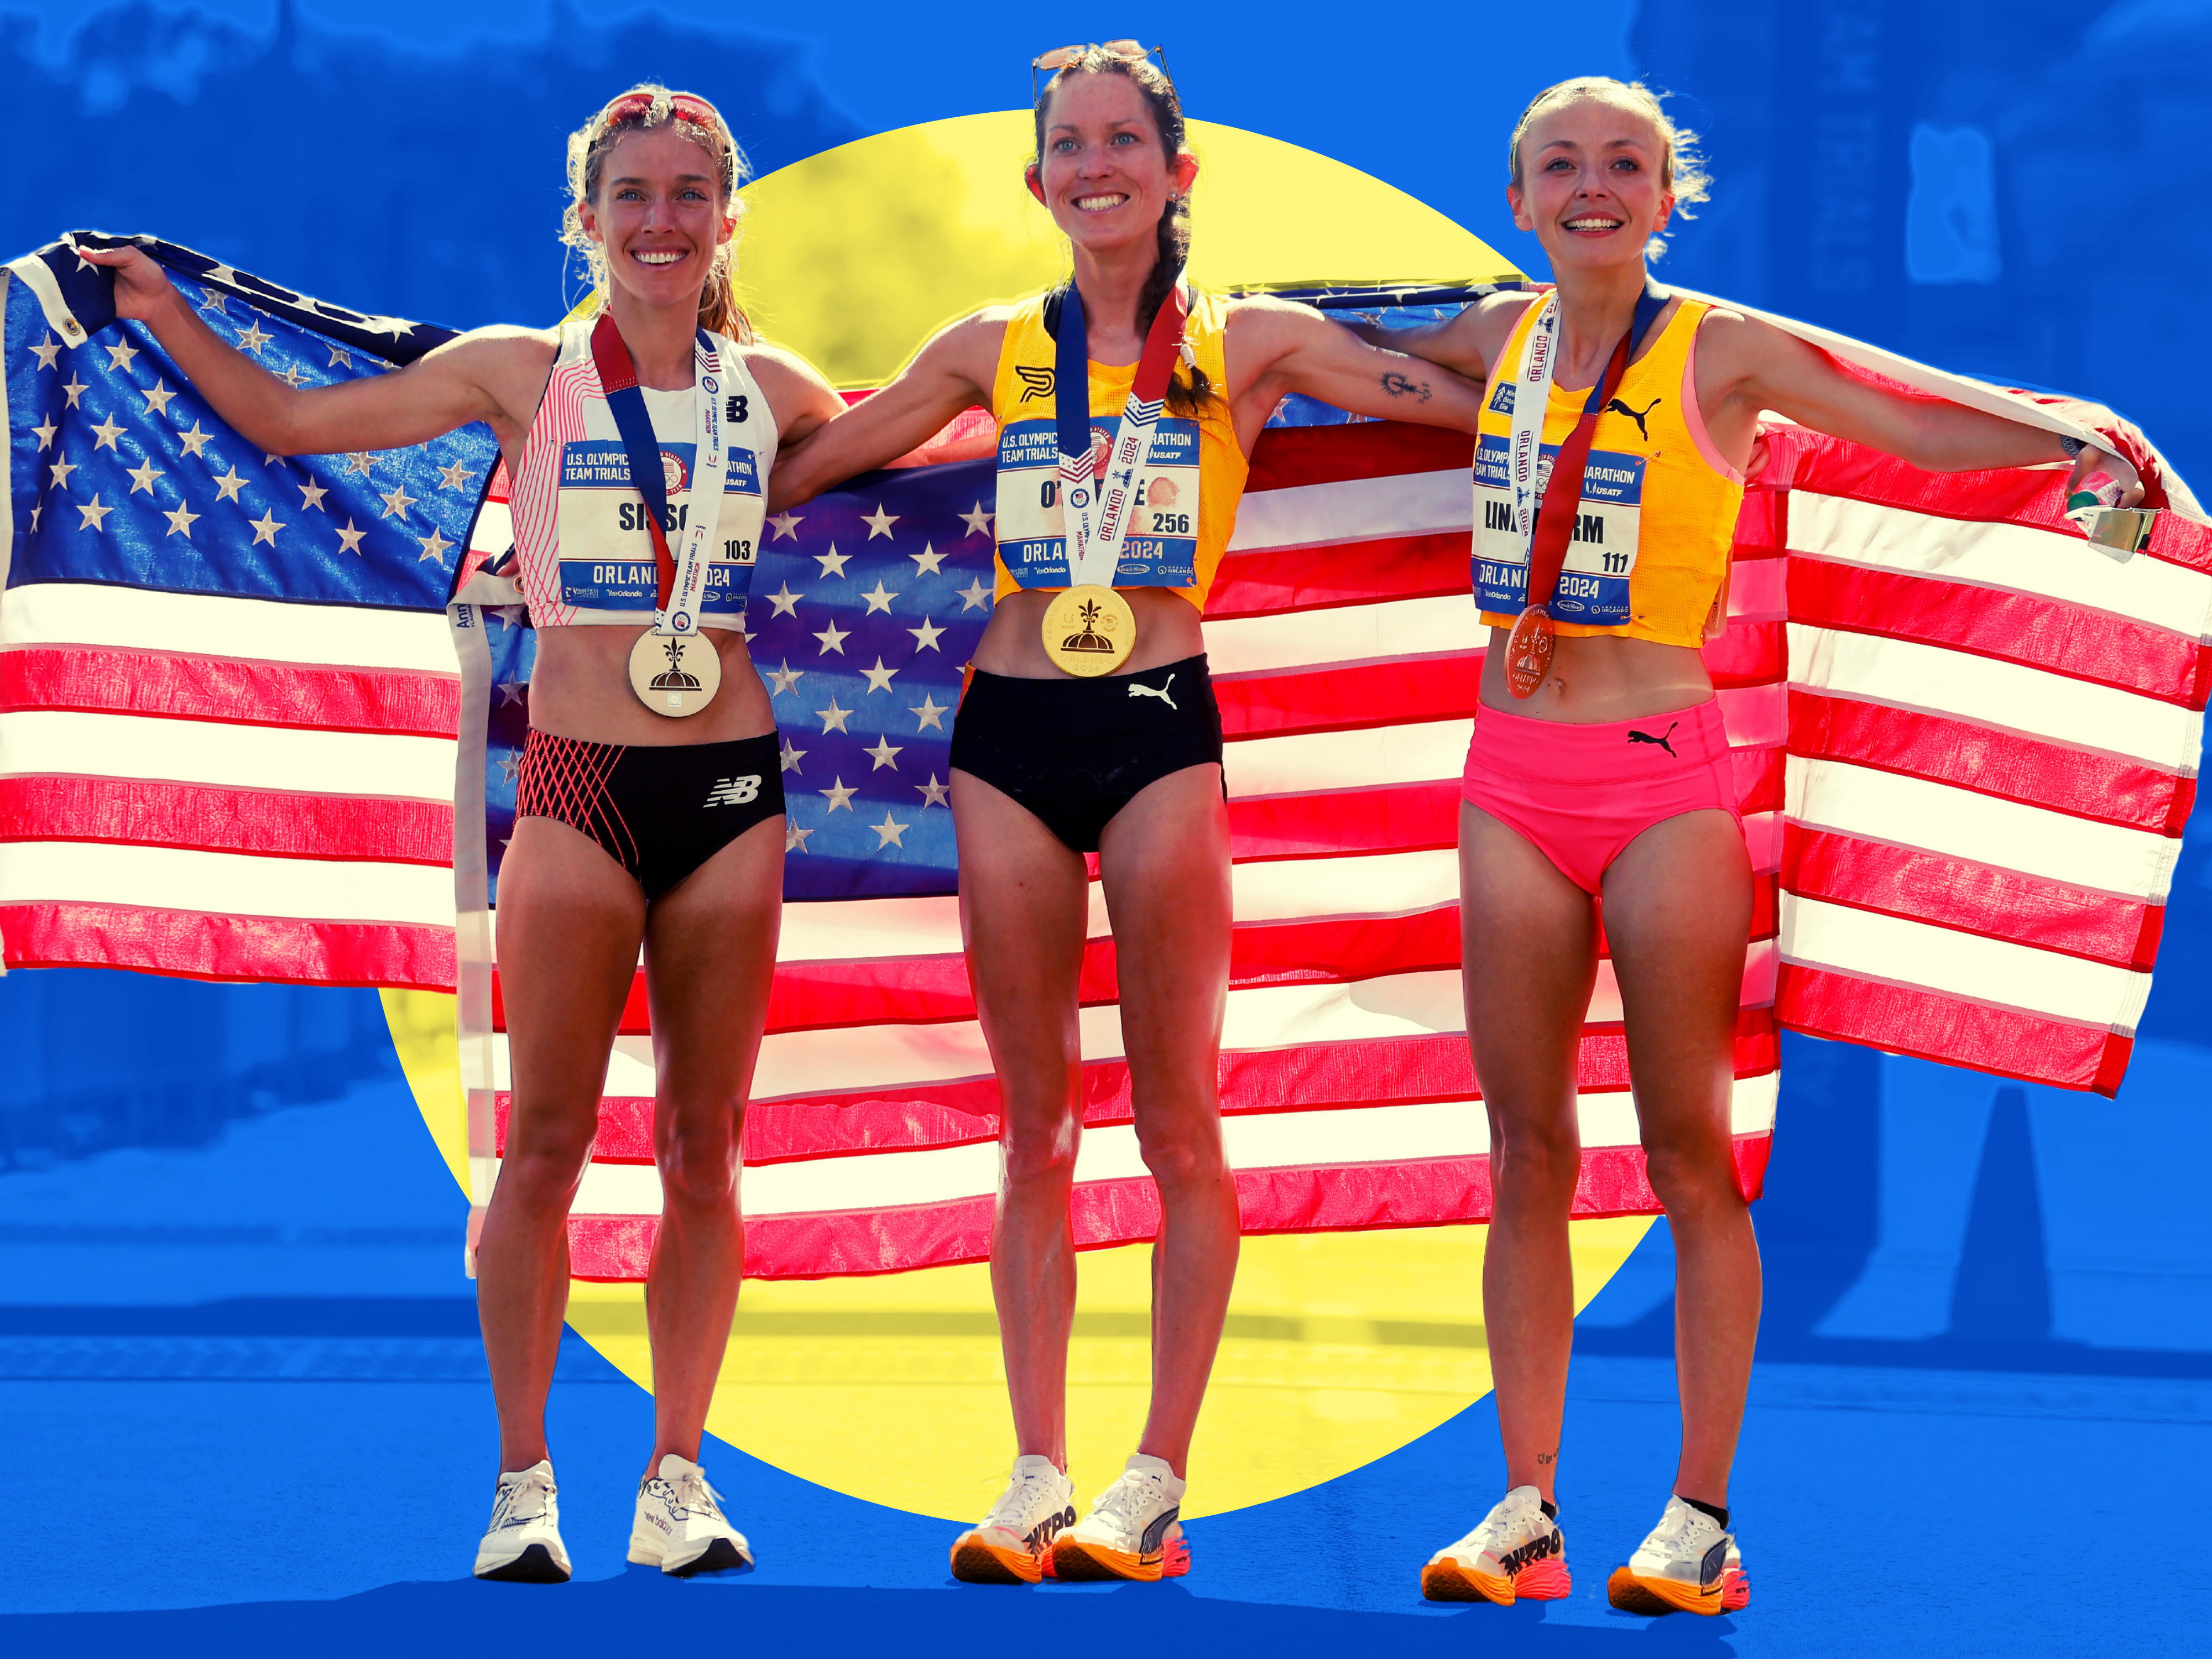 Meet the Olympic Marathoners Going for Team USA’s First Gold in 40 Years